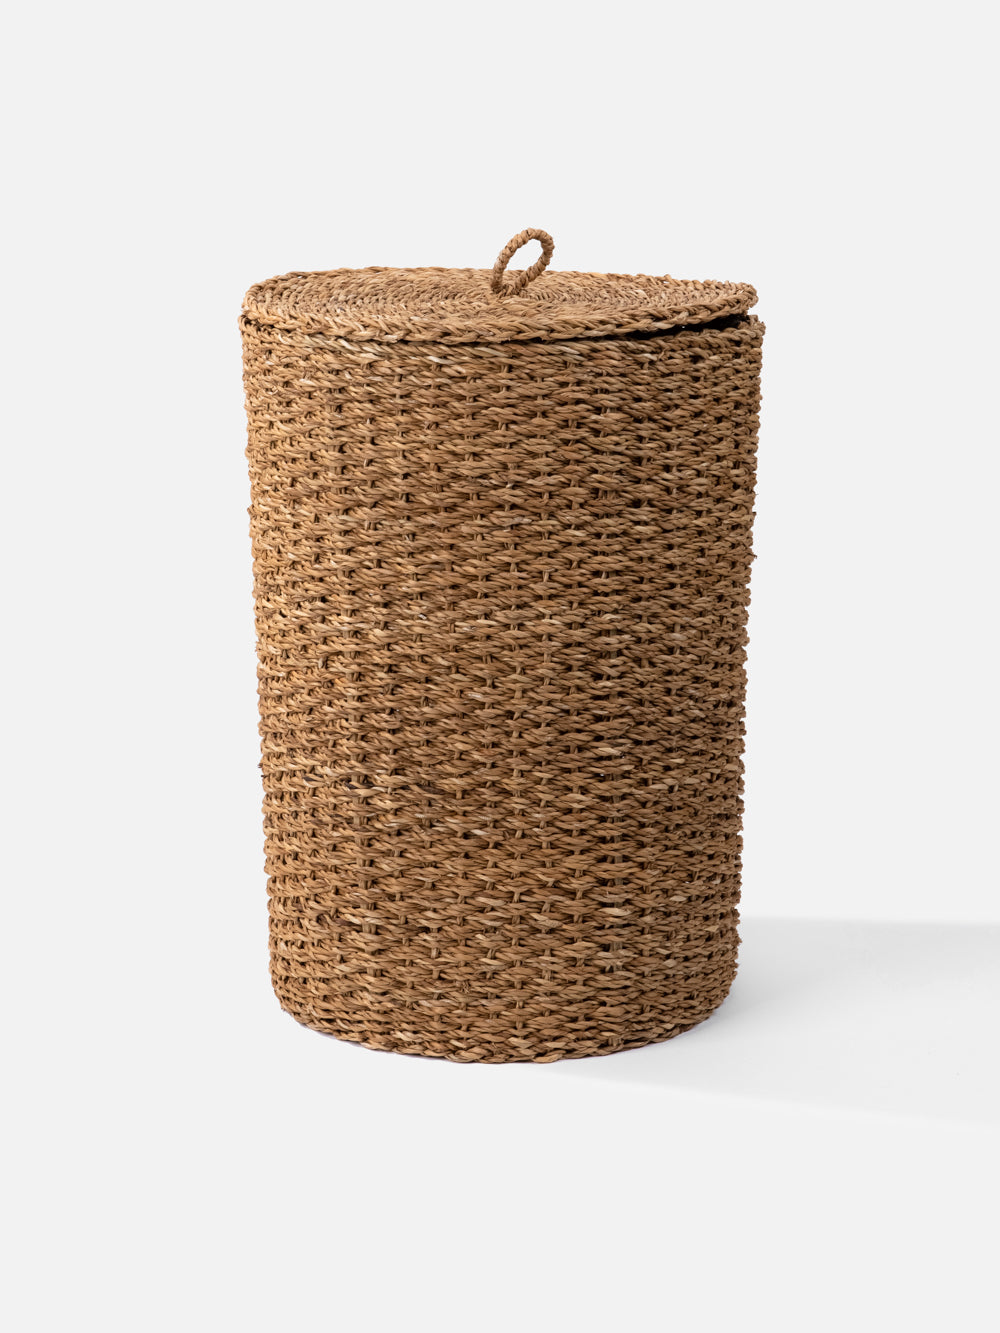 ALIBABA Woven Hamper with Lid